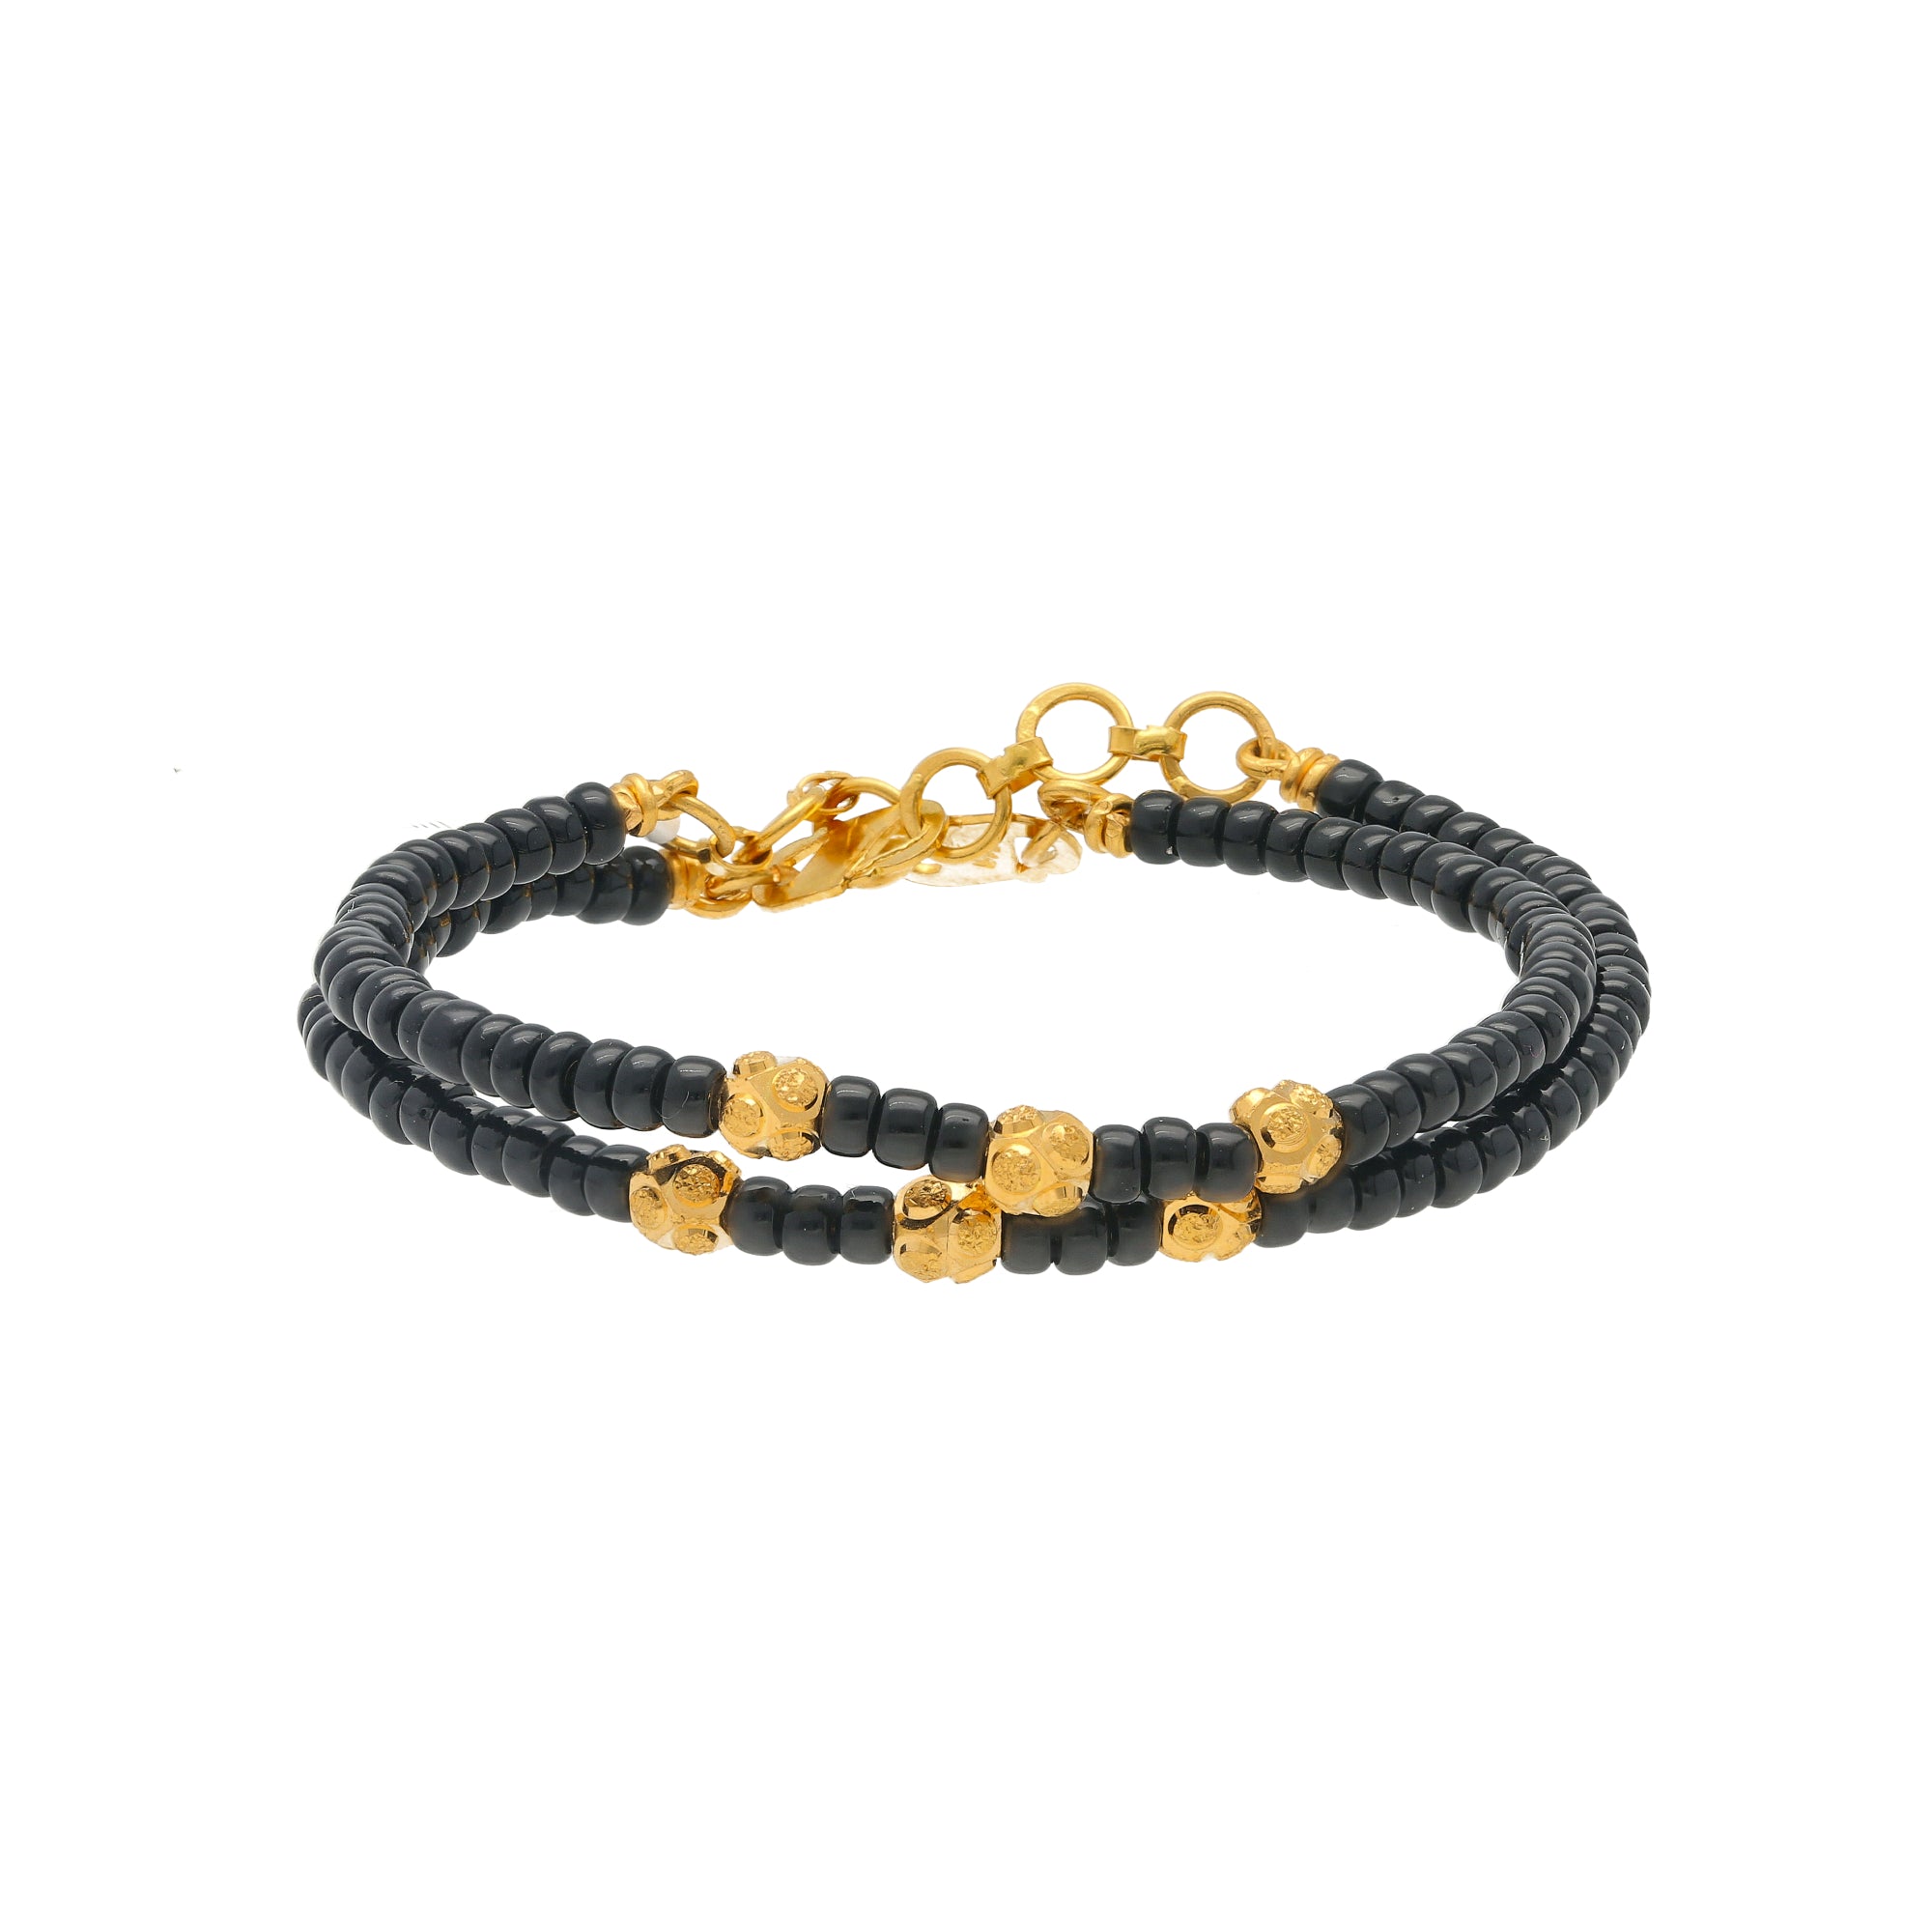 Latest Black Beads And Gold Beads Bracelet Designs With Weight And Price